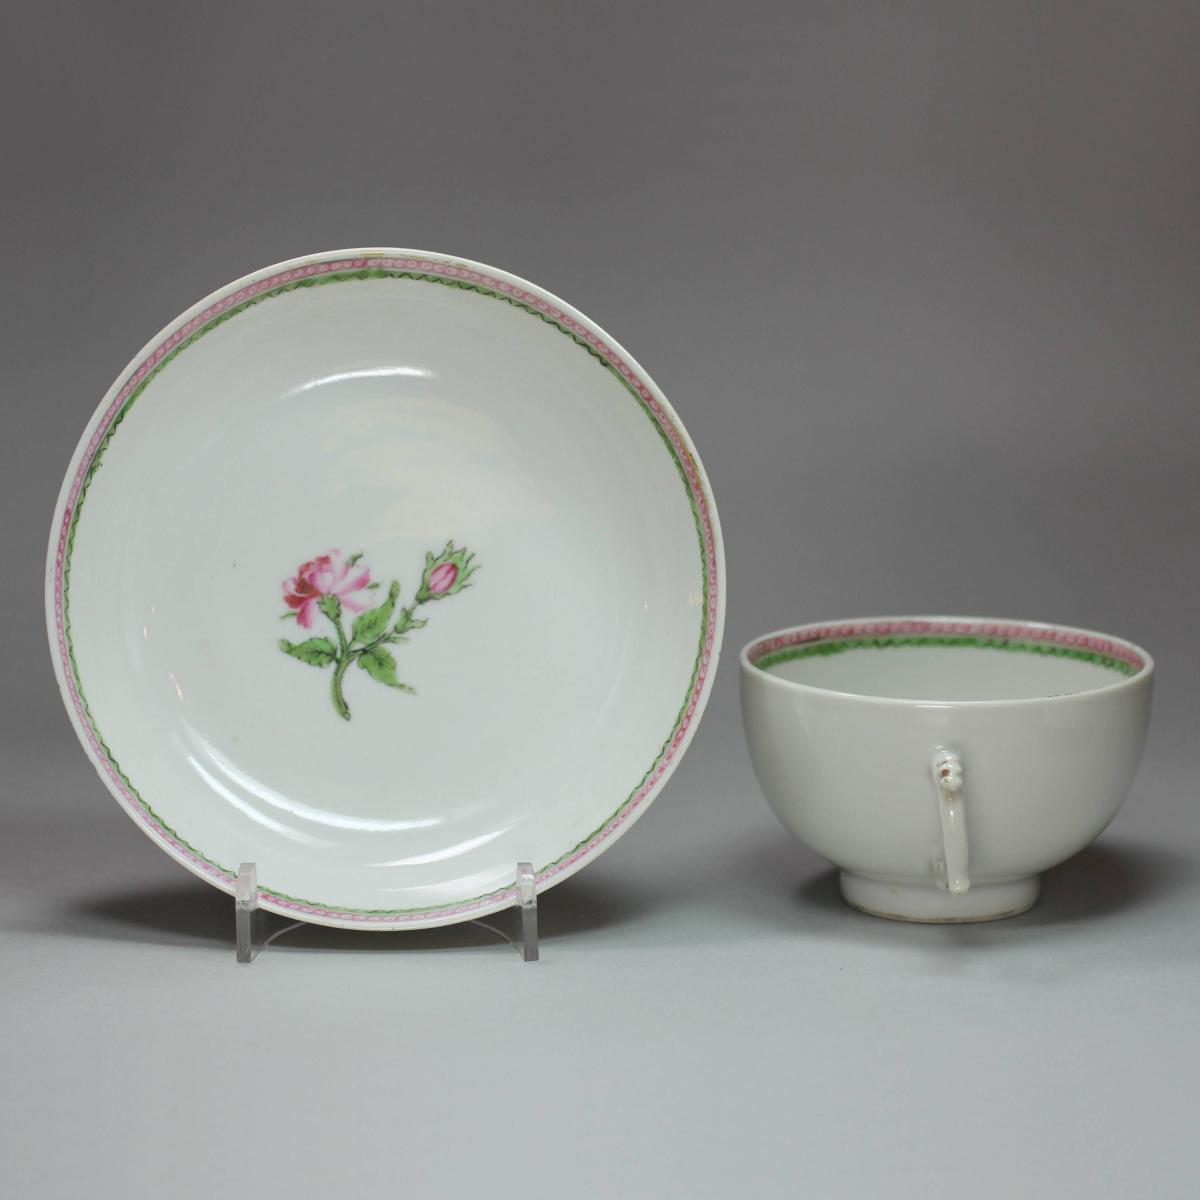 Side of famille rose Qianlong teacup and saucer